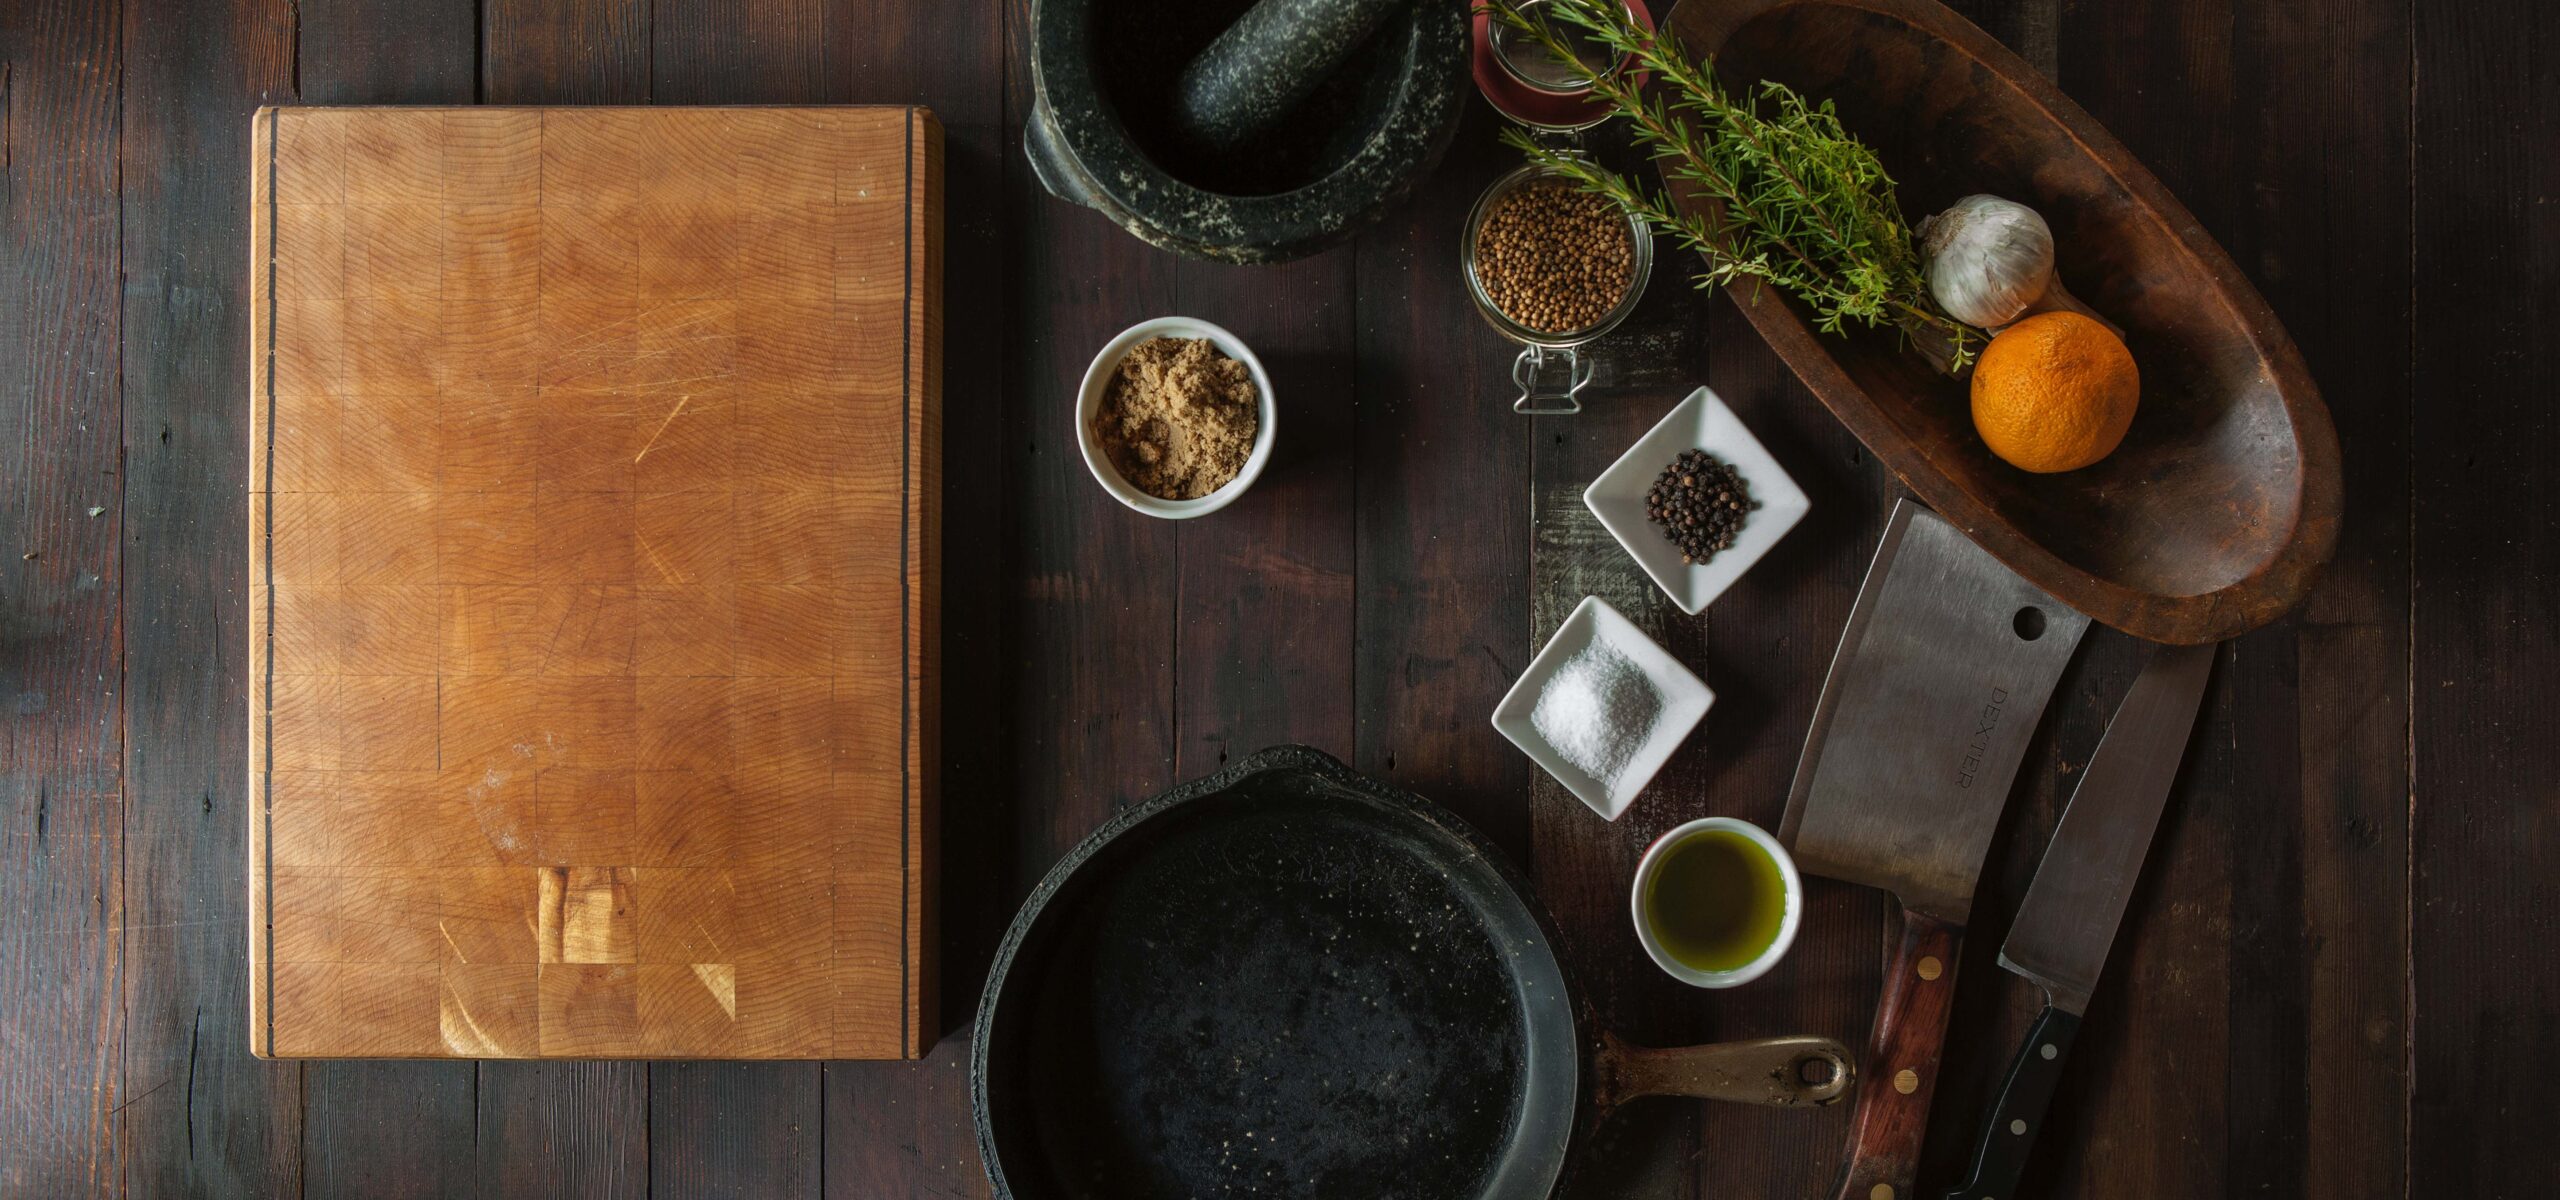 Birds-eye view of a kitchen counter with wood cutting board, herbs, and bowls.